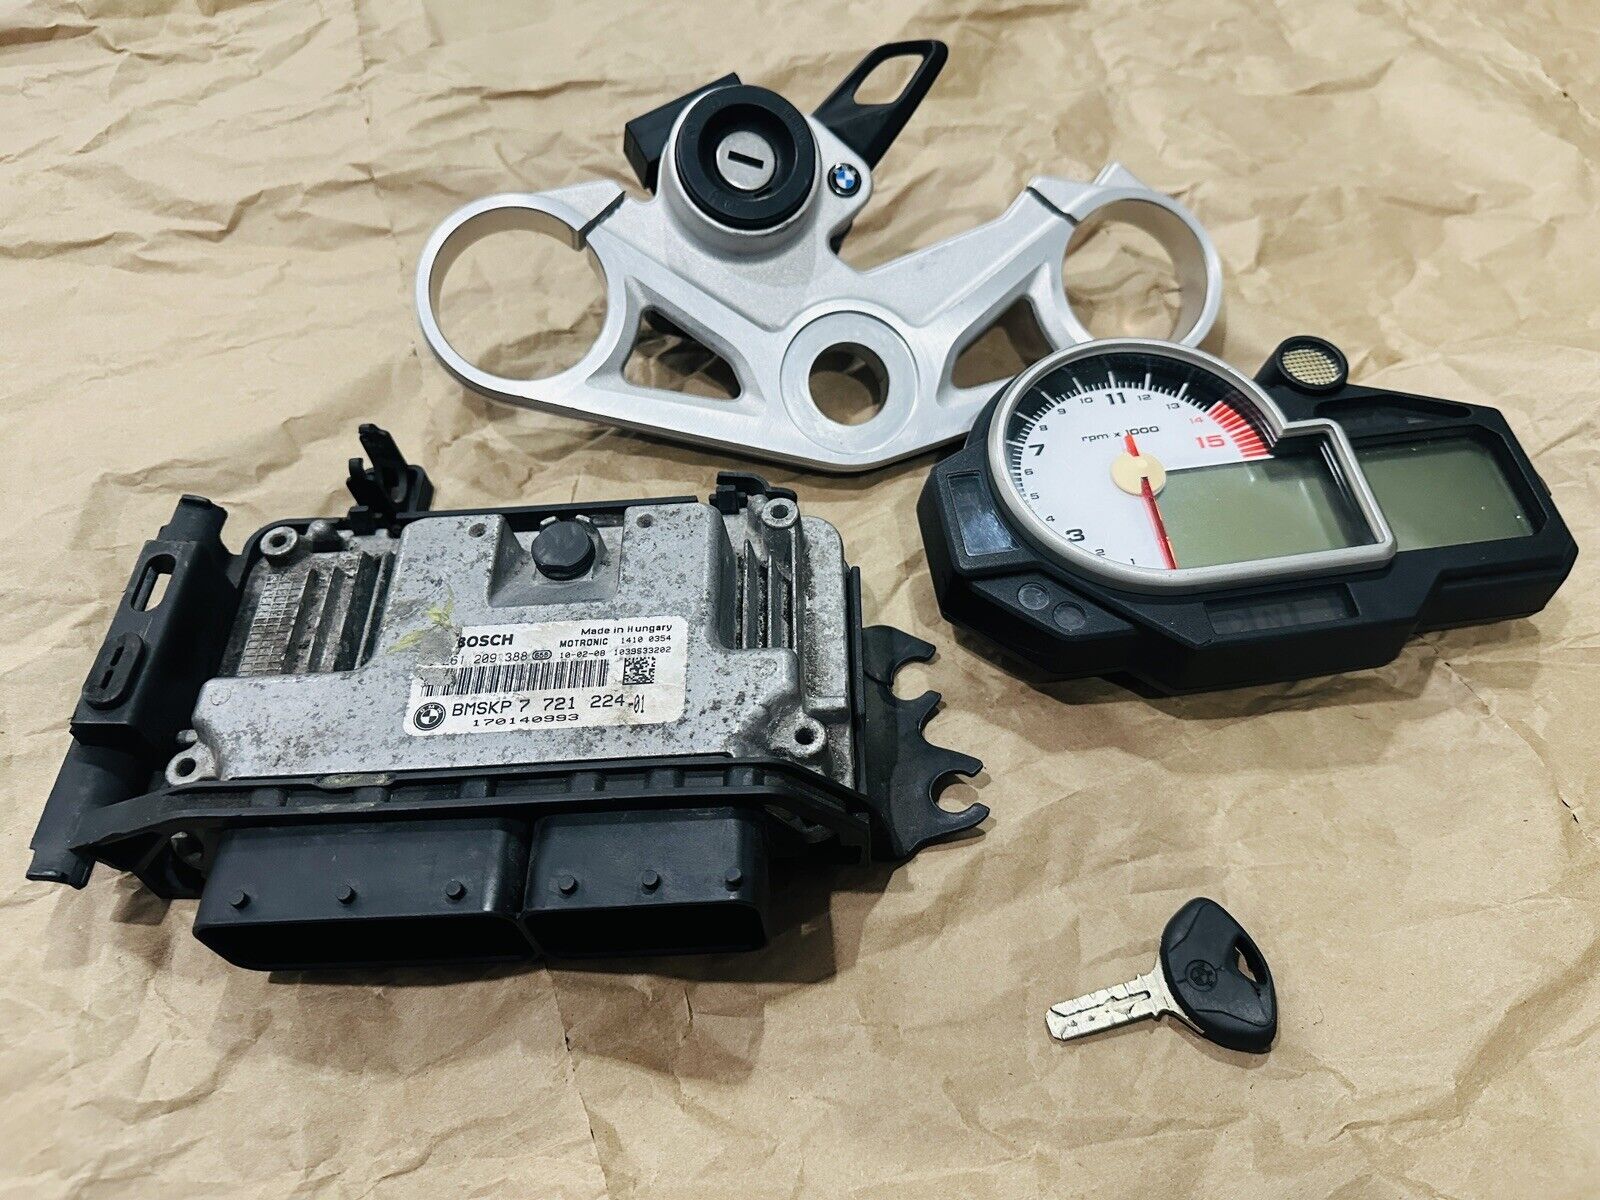 2011 S1000rr Ecu/ignition/speedometer/ Triple Tree Clamp/and Key Full Set